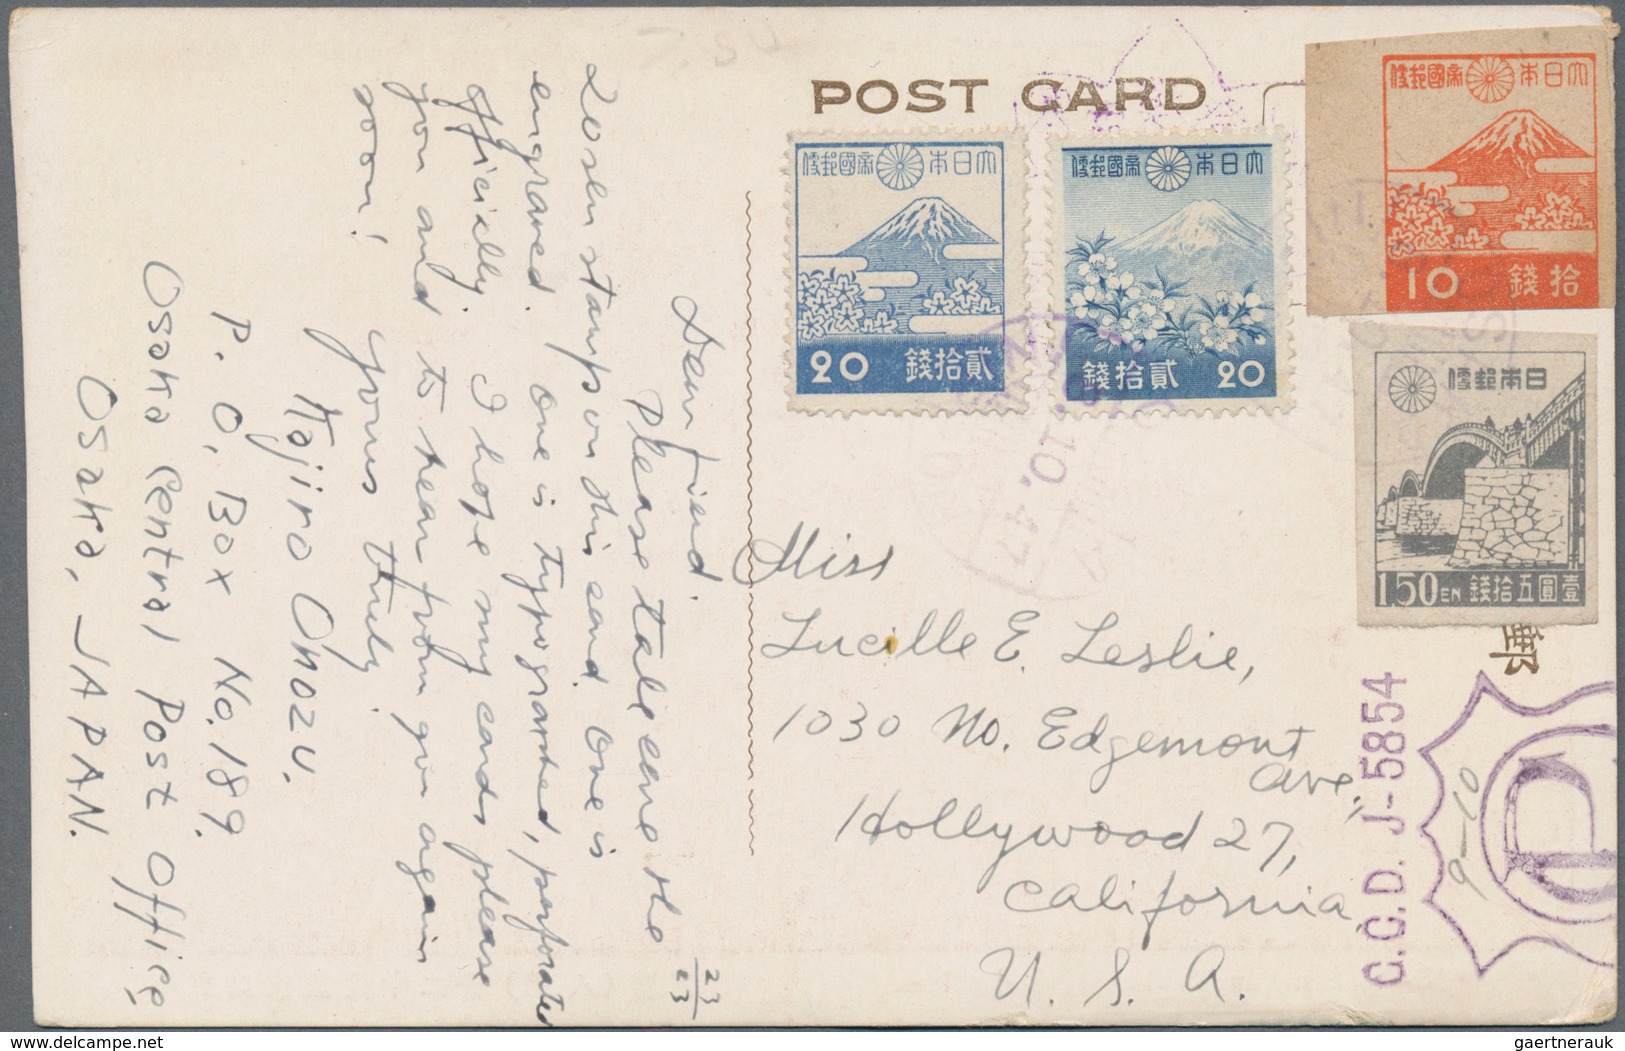 Japan: 1892/1951, covers/used ppc (35) inc. mourning cover, Etscheid card pmkd. Ponape 1915 (Nanyo S